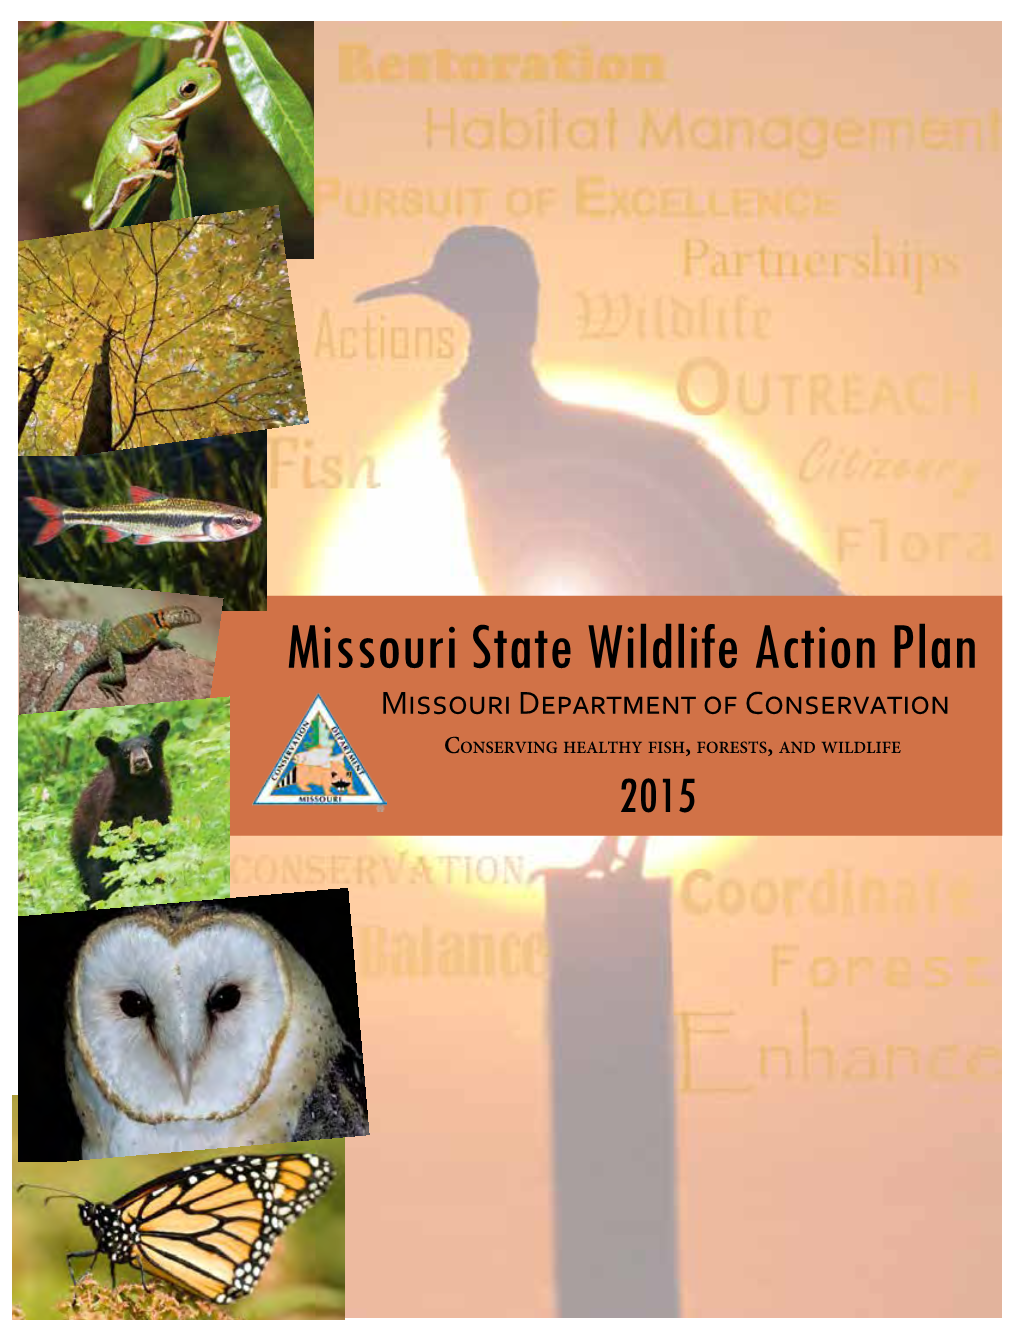 Missouri State Wildlife Action Plan Missouri Department of Conservation Conserving Healthy Fish, Forests, and Wildlife 2015